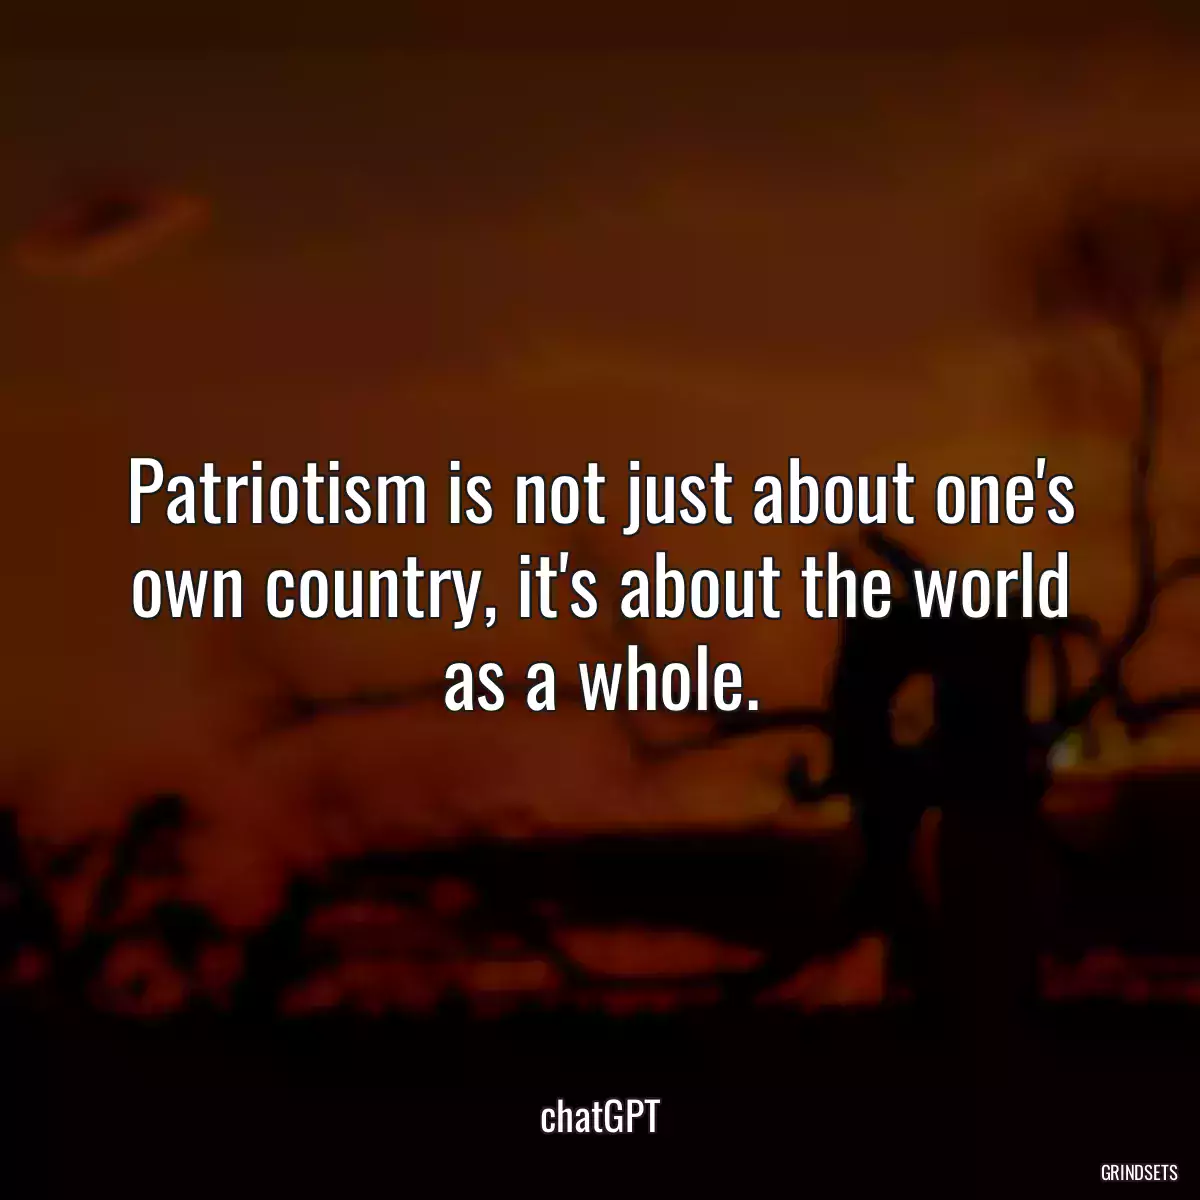 Patriotism is not just about one\'s own country, it\'s about the world as a whole.